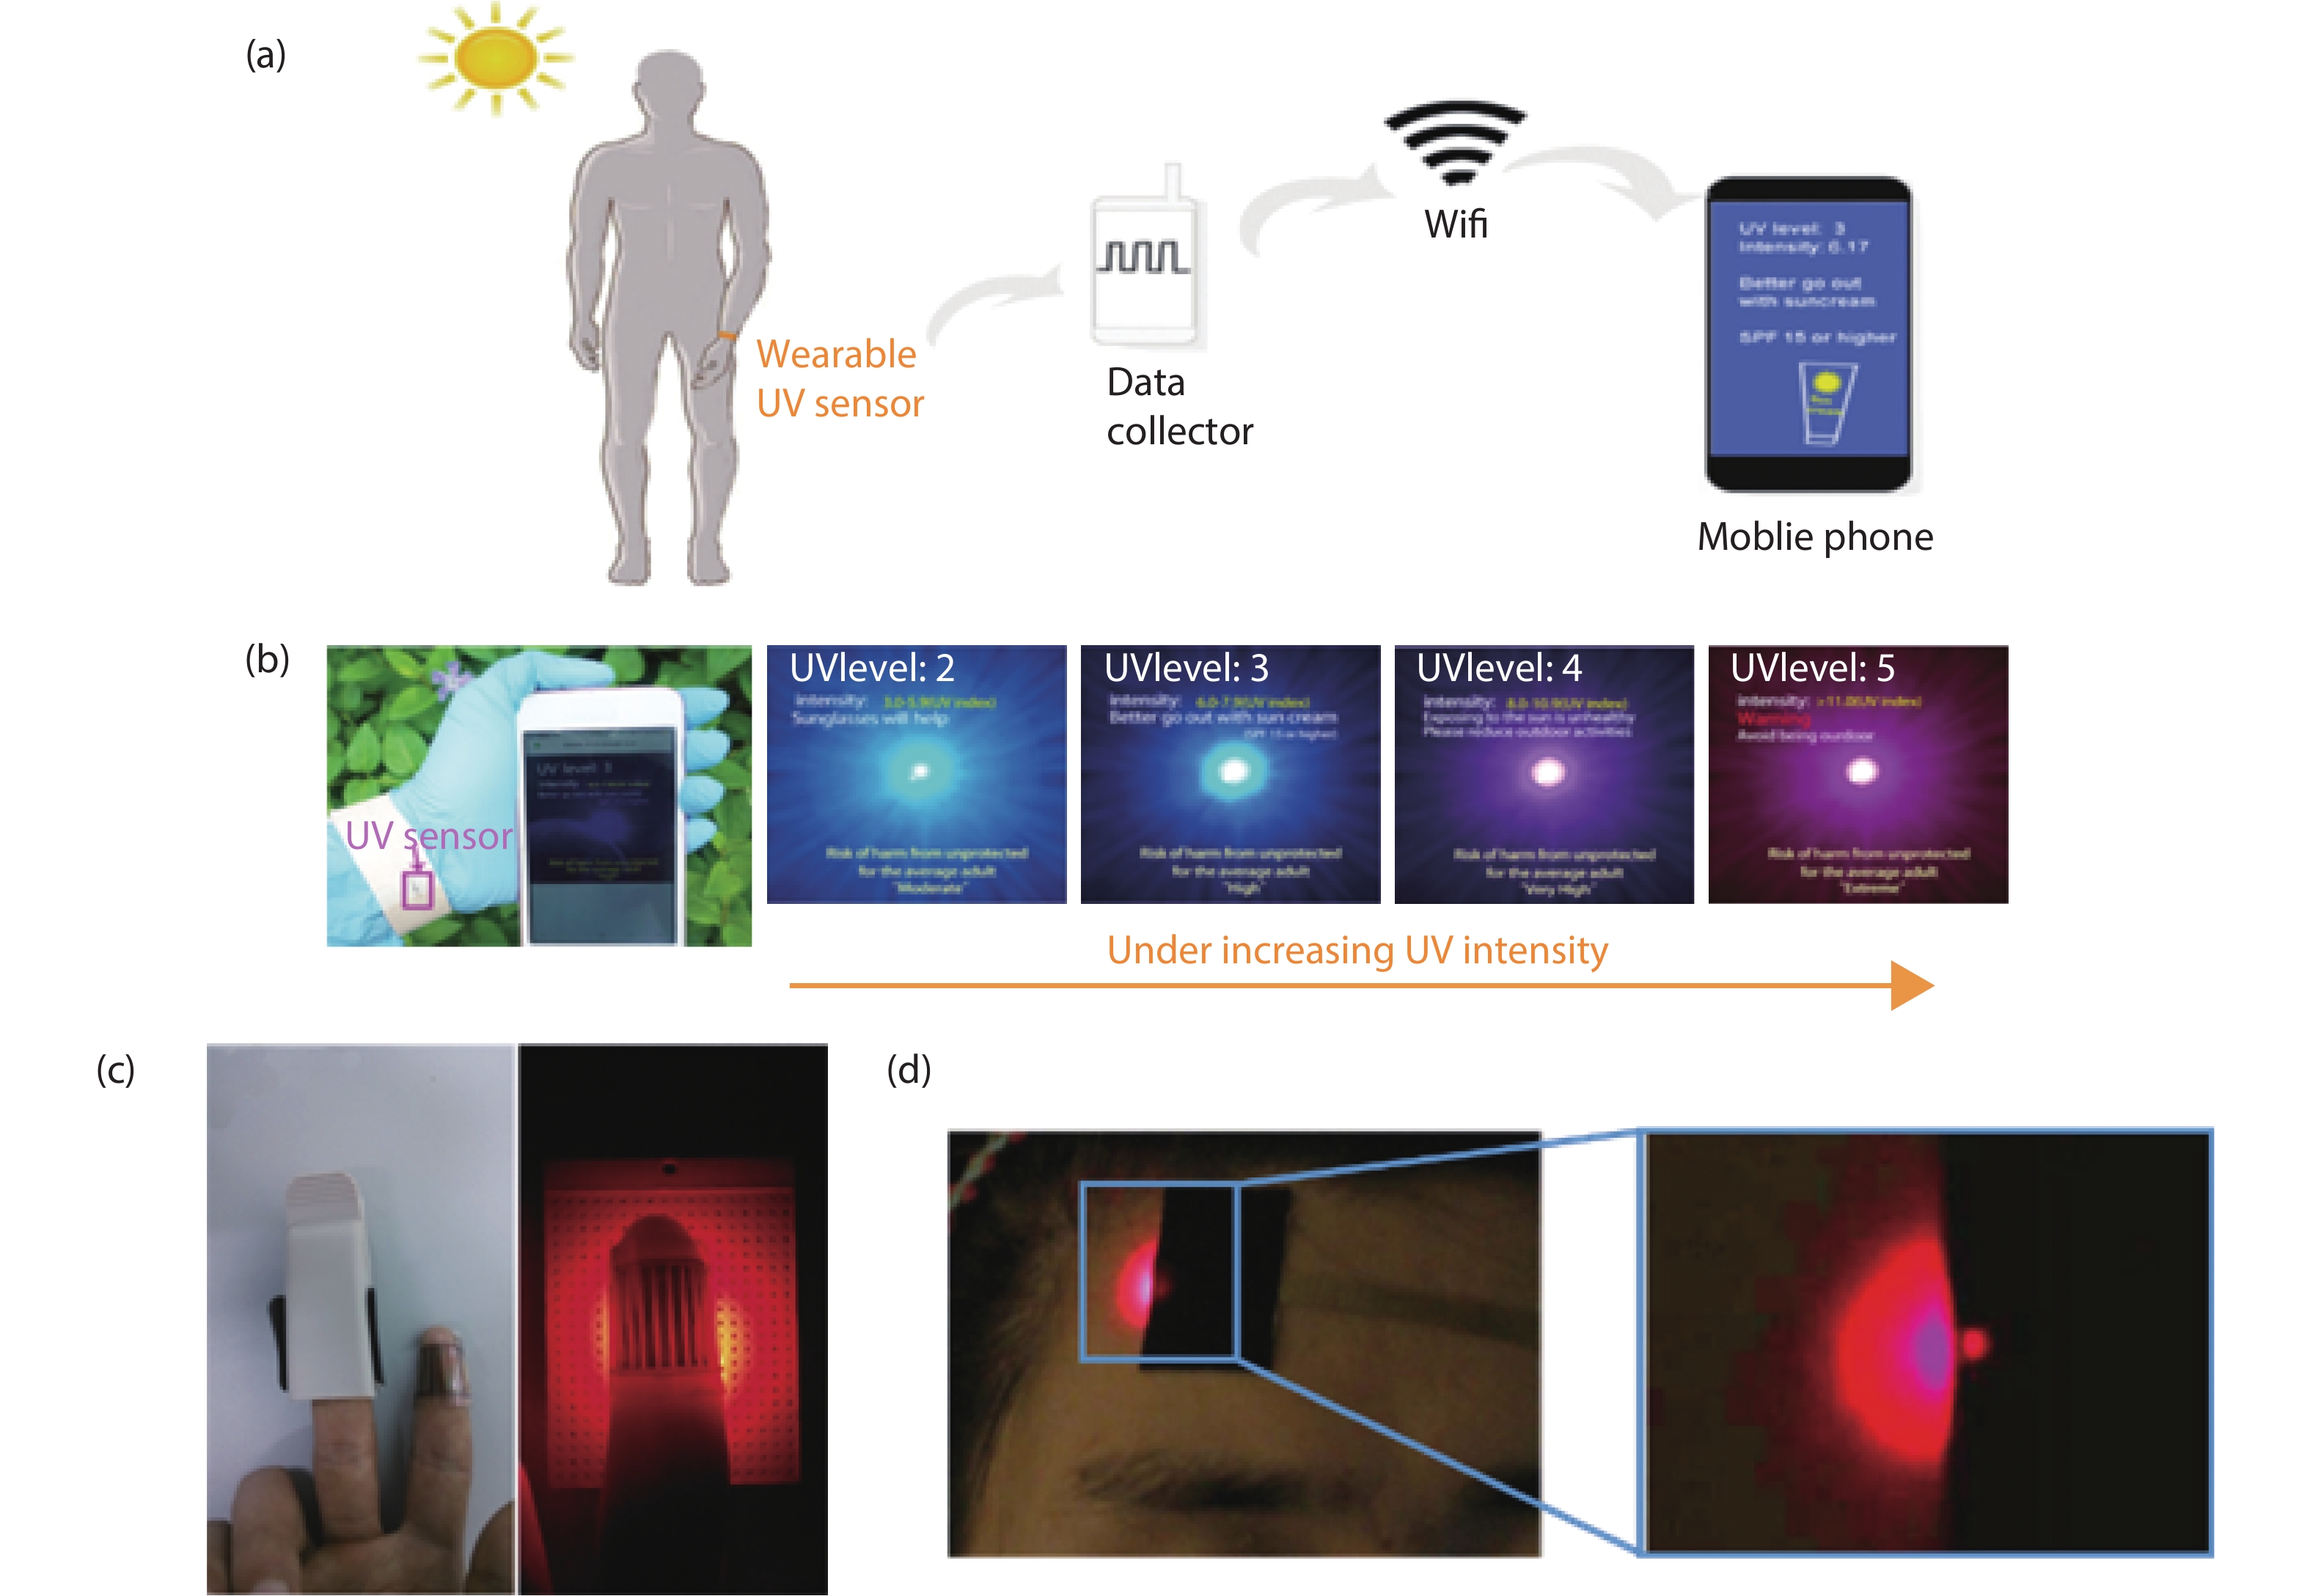 (Color online) Photodetectors for healthcare monitoring. (a) Schematic illustration of the wearable photodetector as a real-time UV monitor[14]. Copyright 2018, Adv Mater. (b) Photographs of a wearable real-time UV sensor in real life[14]. Copyright 2018, Adv Mater. (c) Comparison between traditional heart-rate sensor probe (clipped at middle finger) and the wearable photodetector (worn at forefinger)[15]. Copyright 2014, Appl Phys Lett. (d) Image of a device laminated on the skin of forehead, with an operating m-ILED (wavelength 650 nm) under room light illumination and in the dark[16]. Copyright 2014, Nat Commun.